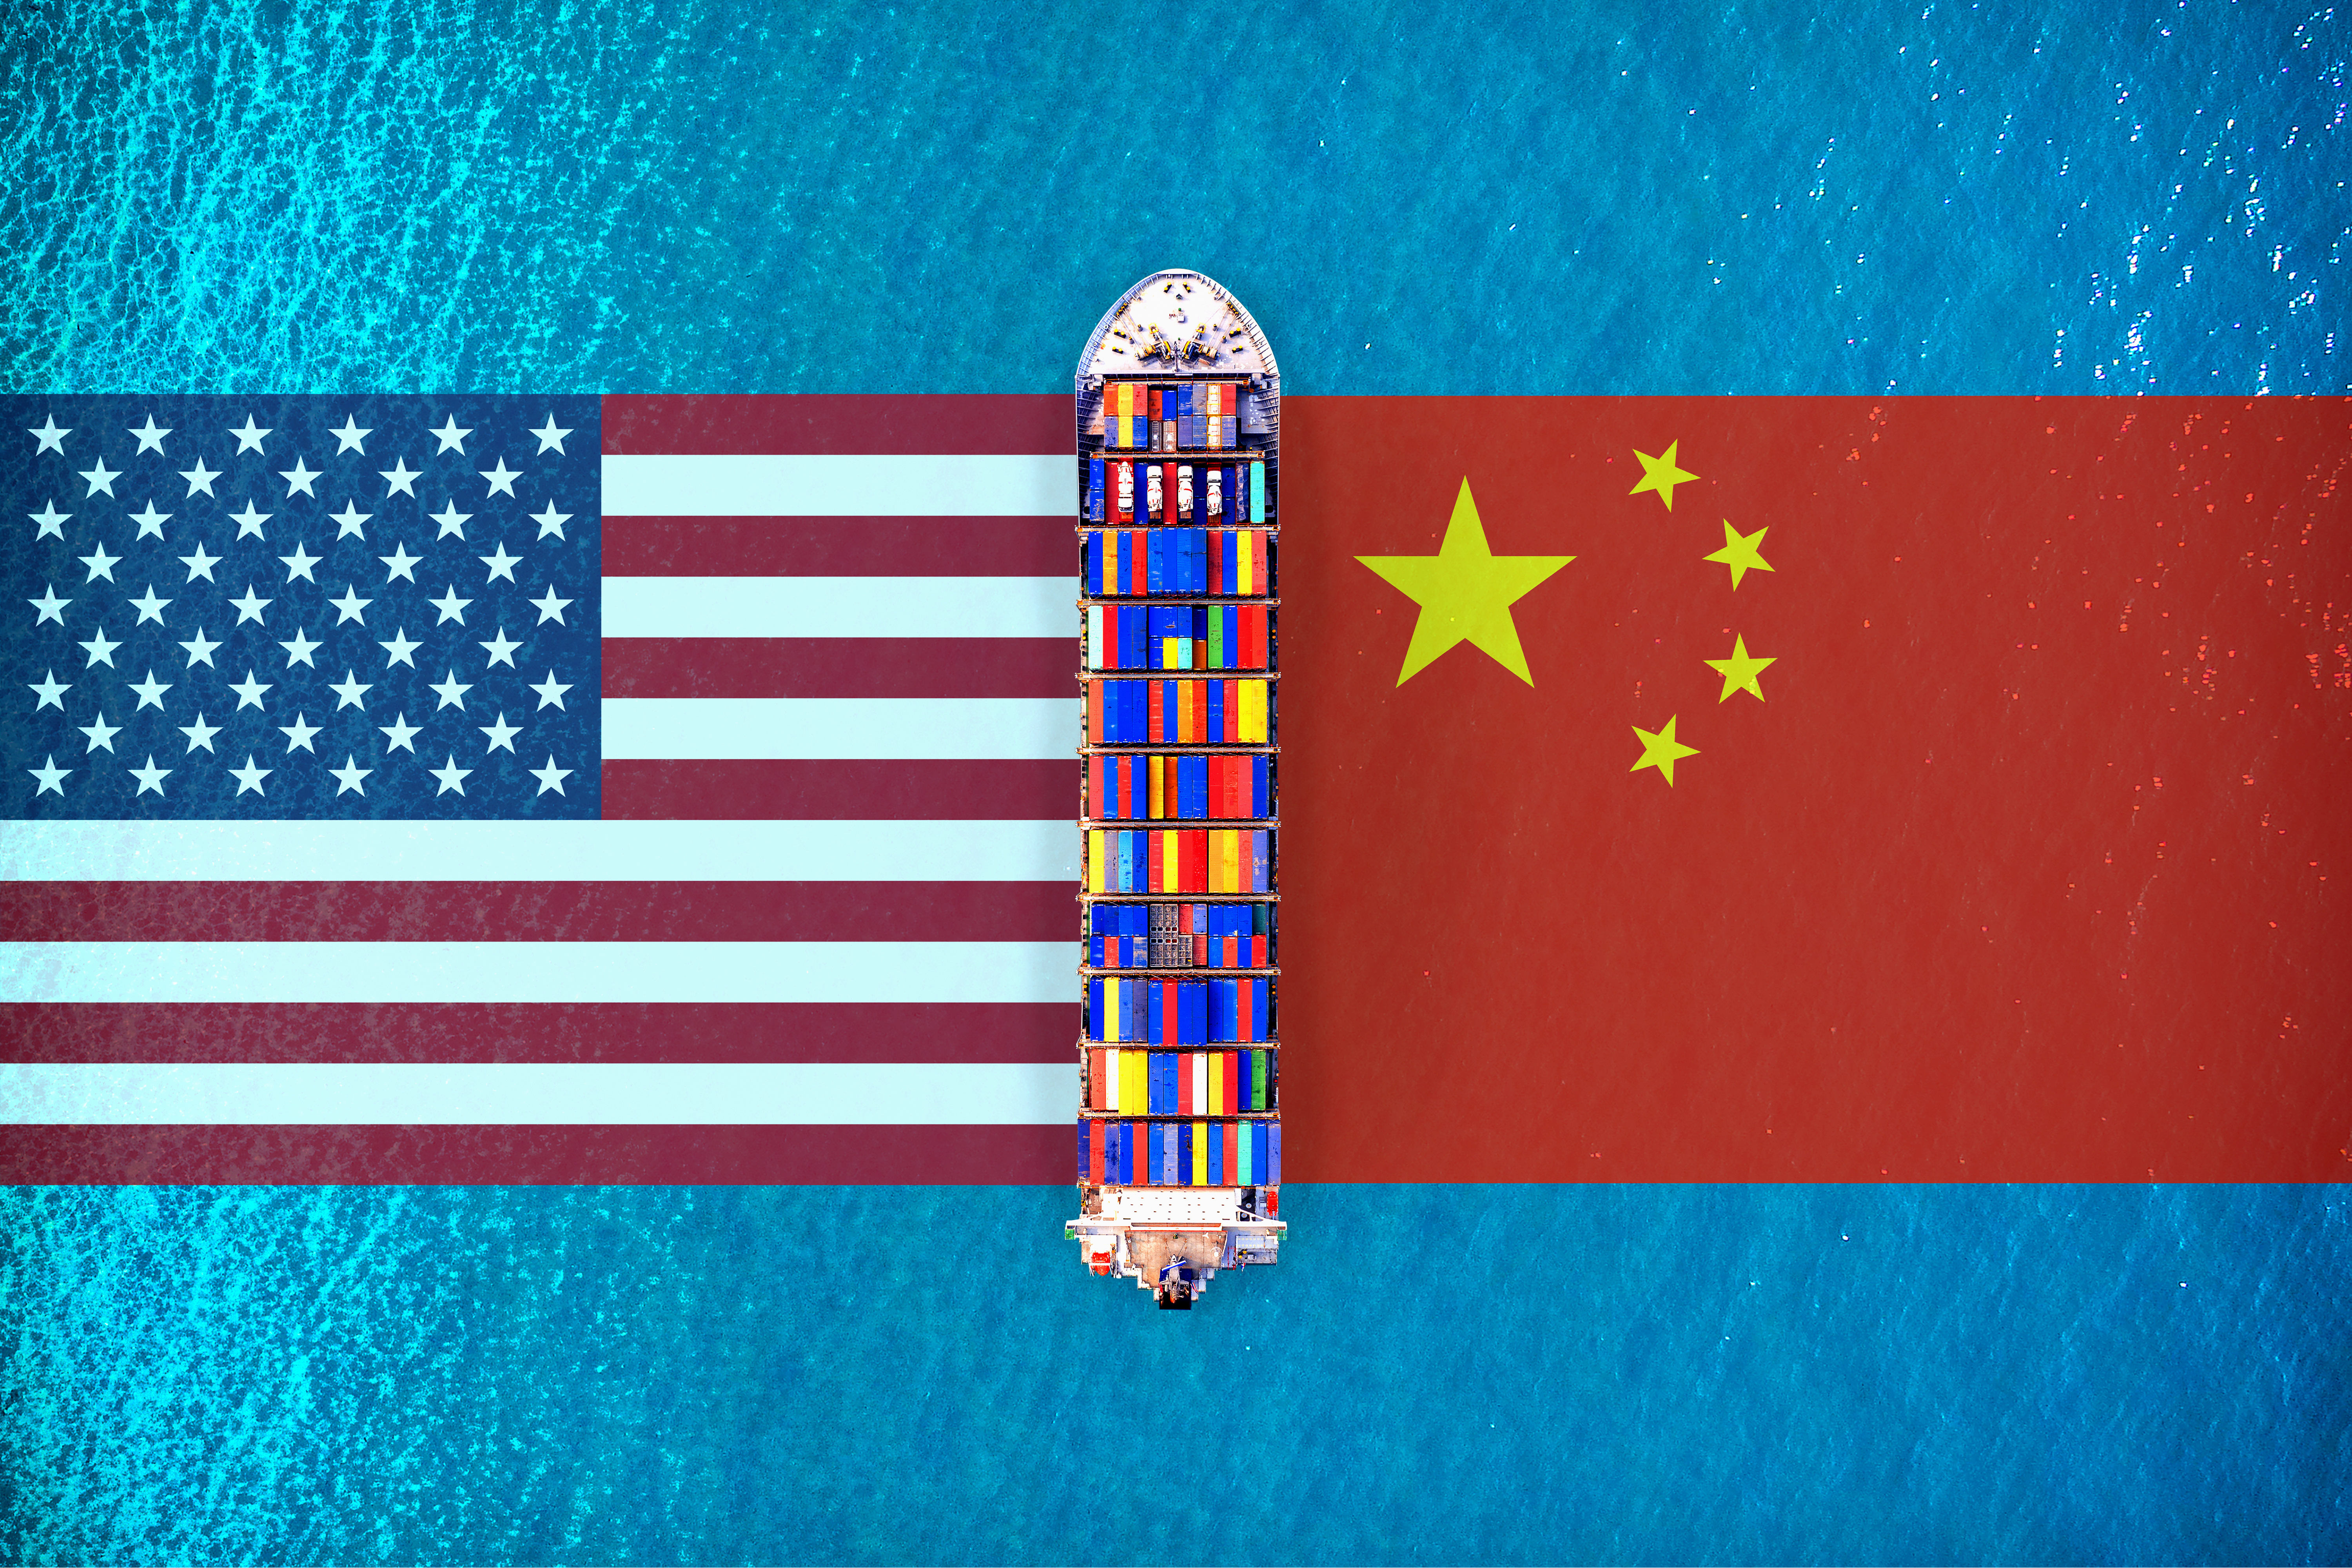 Container ship in between the US and Chinese flags